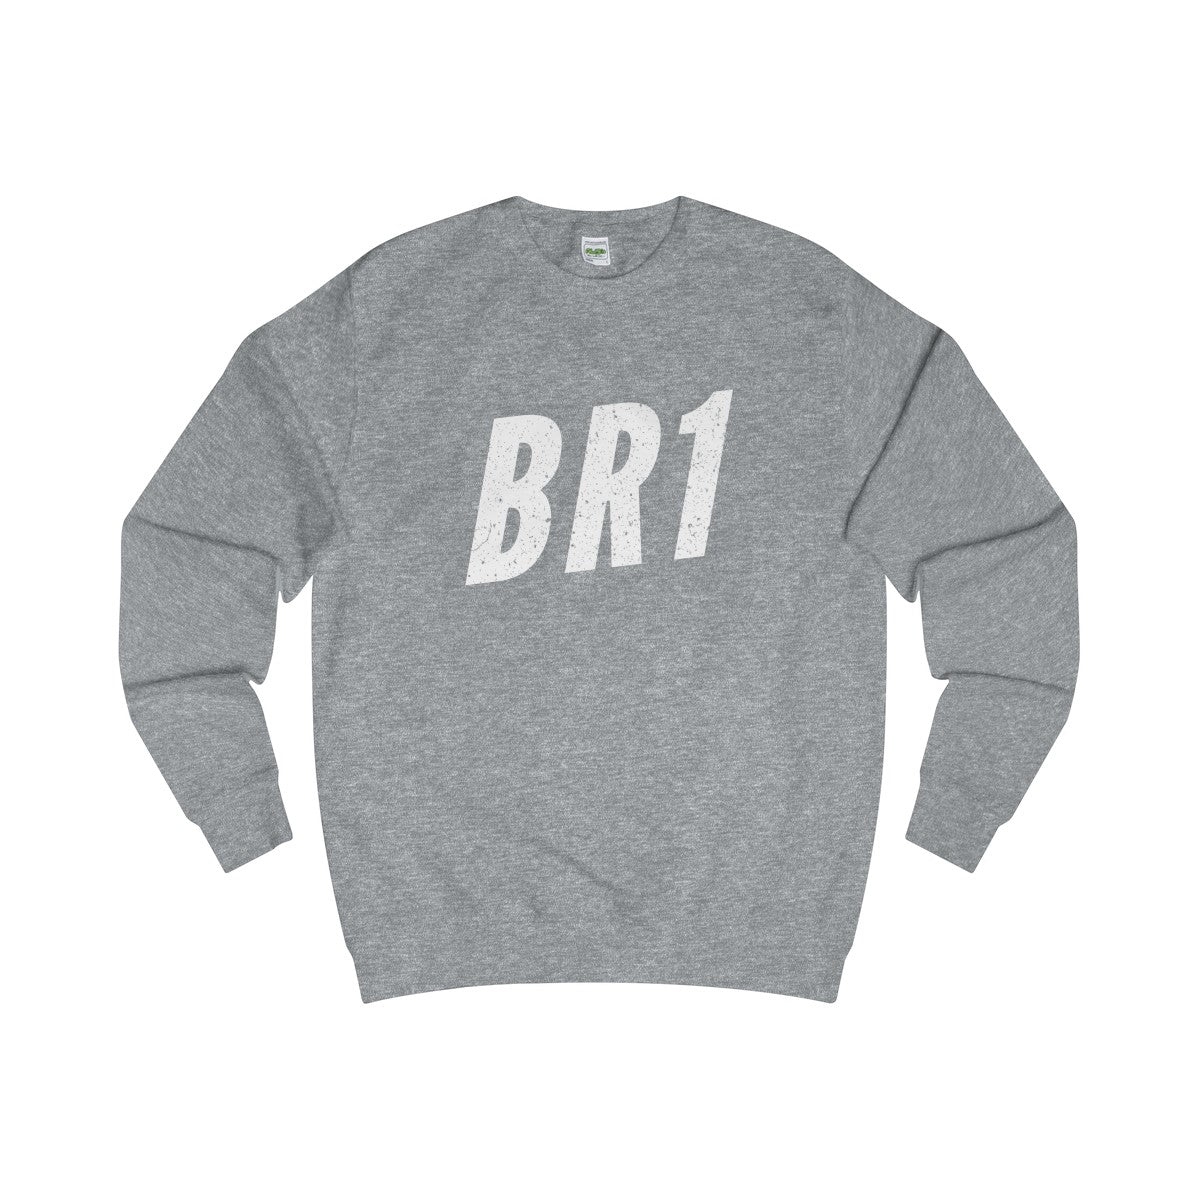 Bromley BR1 Sweater